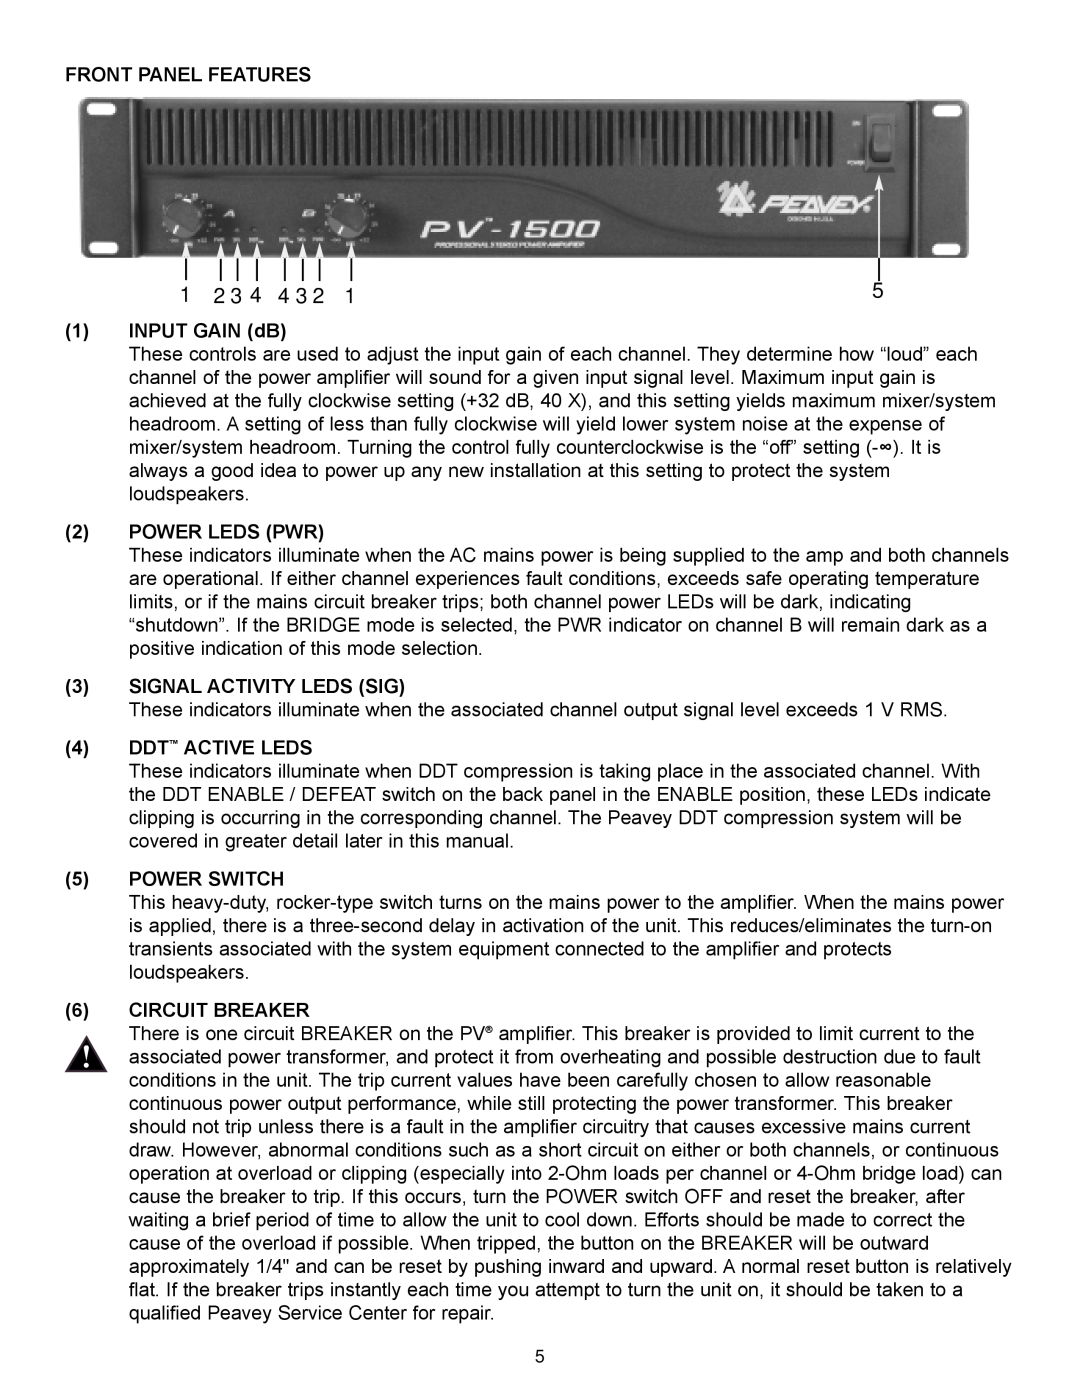 Peavey PV Series manual Front Panel Features, 1INPUT GAIN dB, 2POWER LEDS PWR, 3SIGNAL ACTIVITY LEDS SIG, 4DDT ACTIVE LEDS 